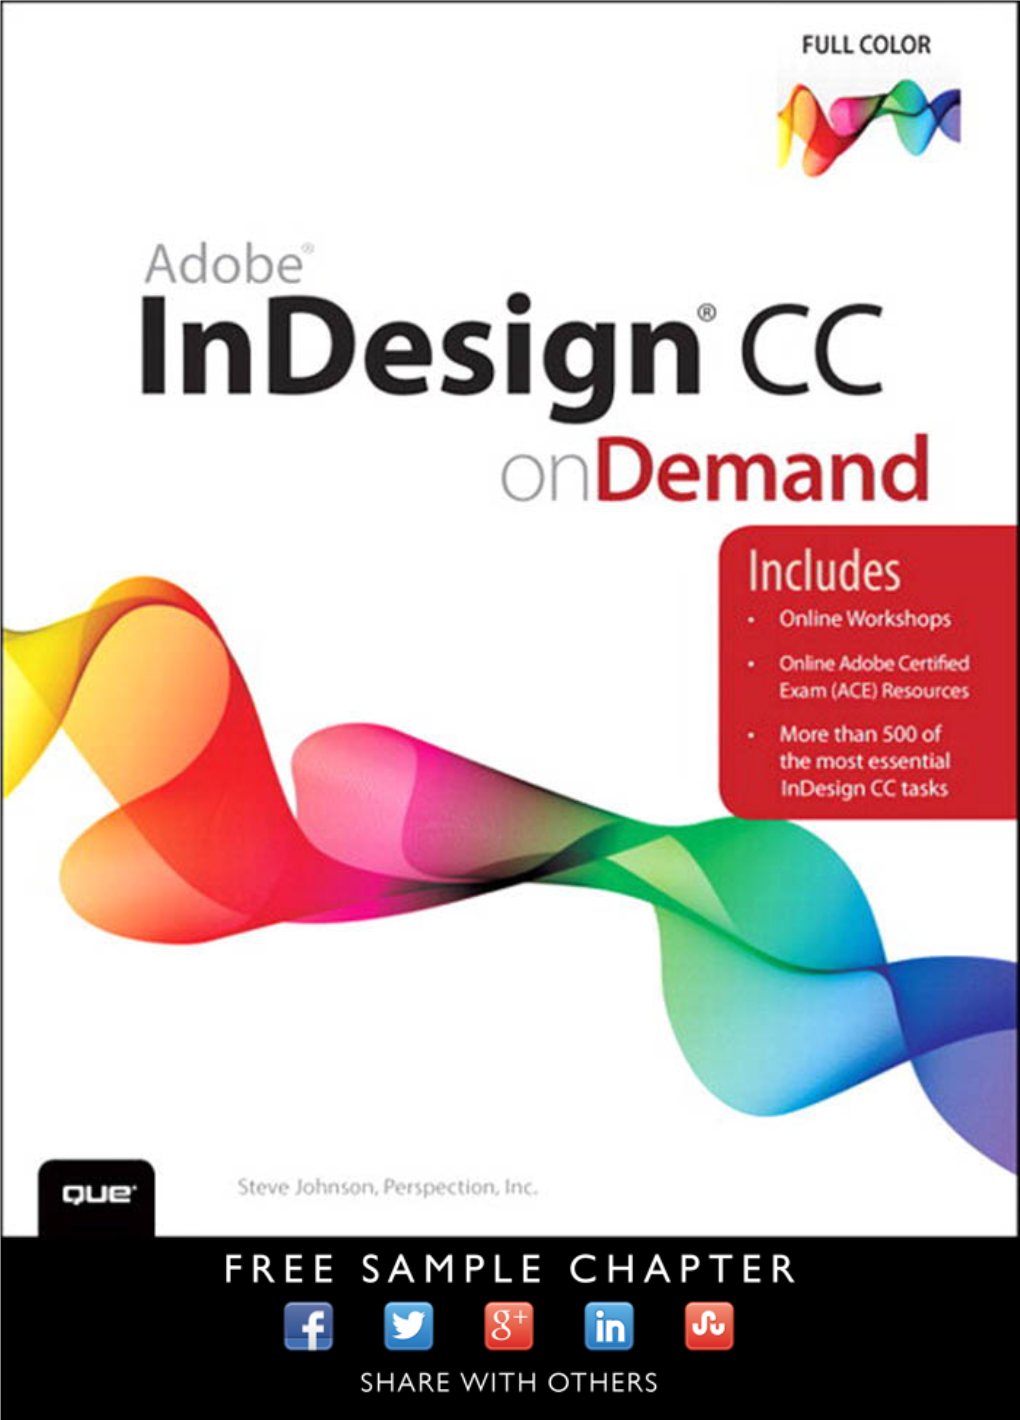 Adobe® Indesign® CC on Demand Publisher Paul Boger Copyright © 2013 by Perspection, Inc